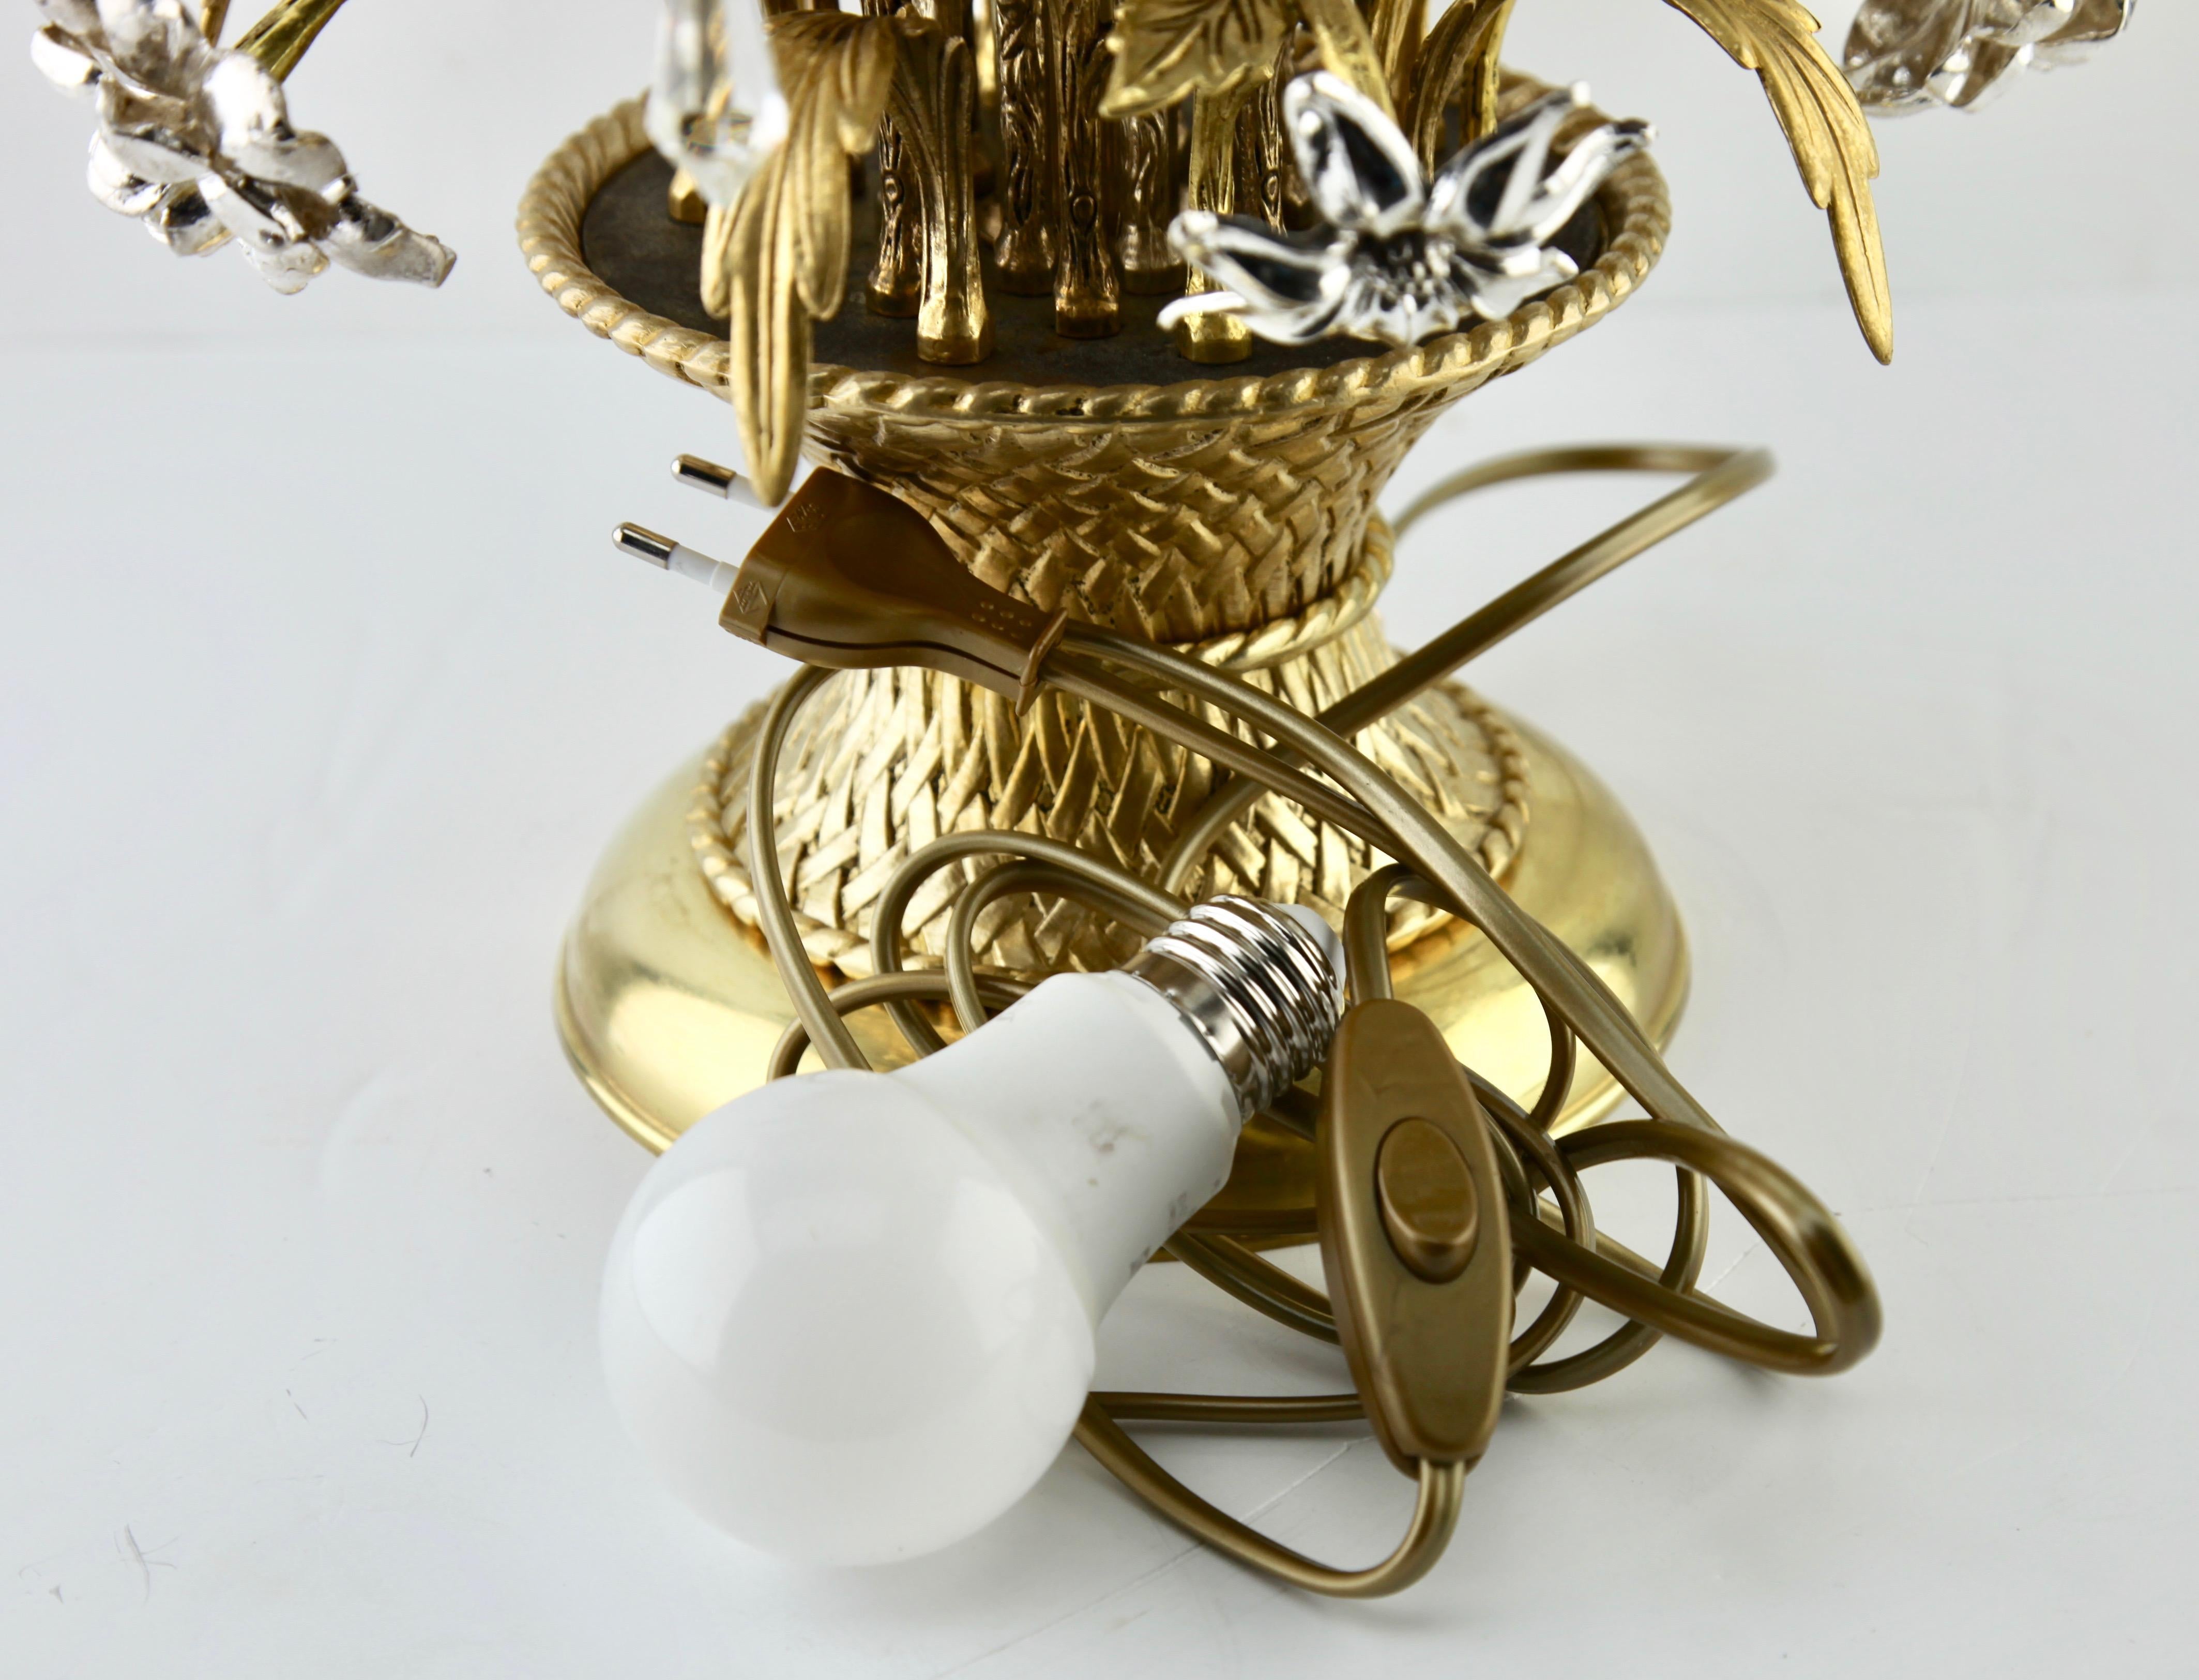 Lamp Representing a Bouquet of Brass and Silver Metal Flowers in a Basket, 1960s For Sale 6